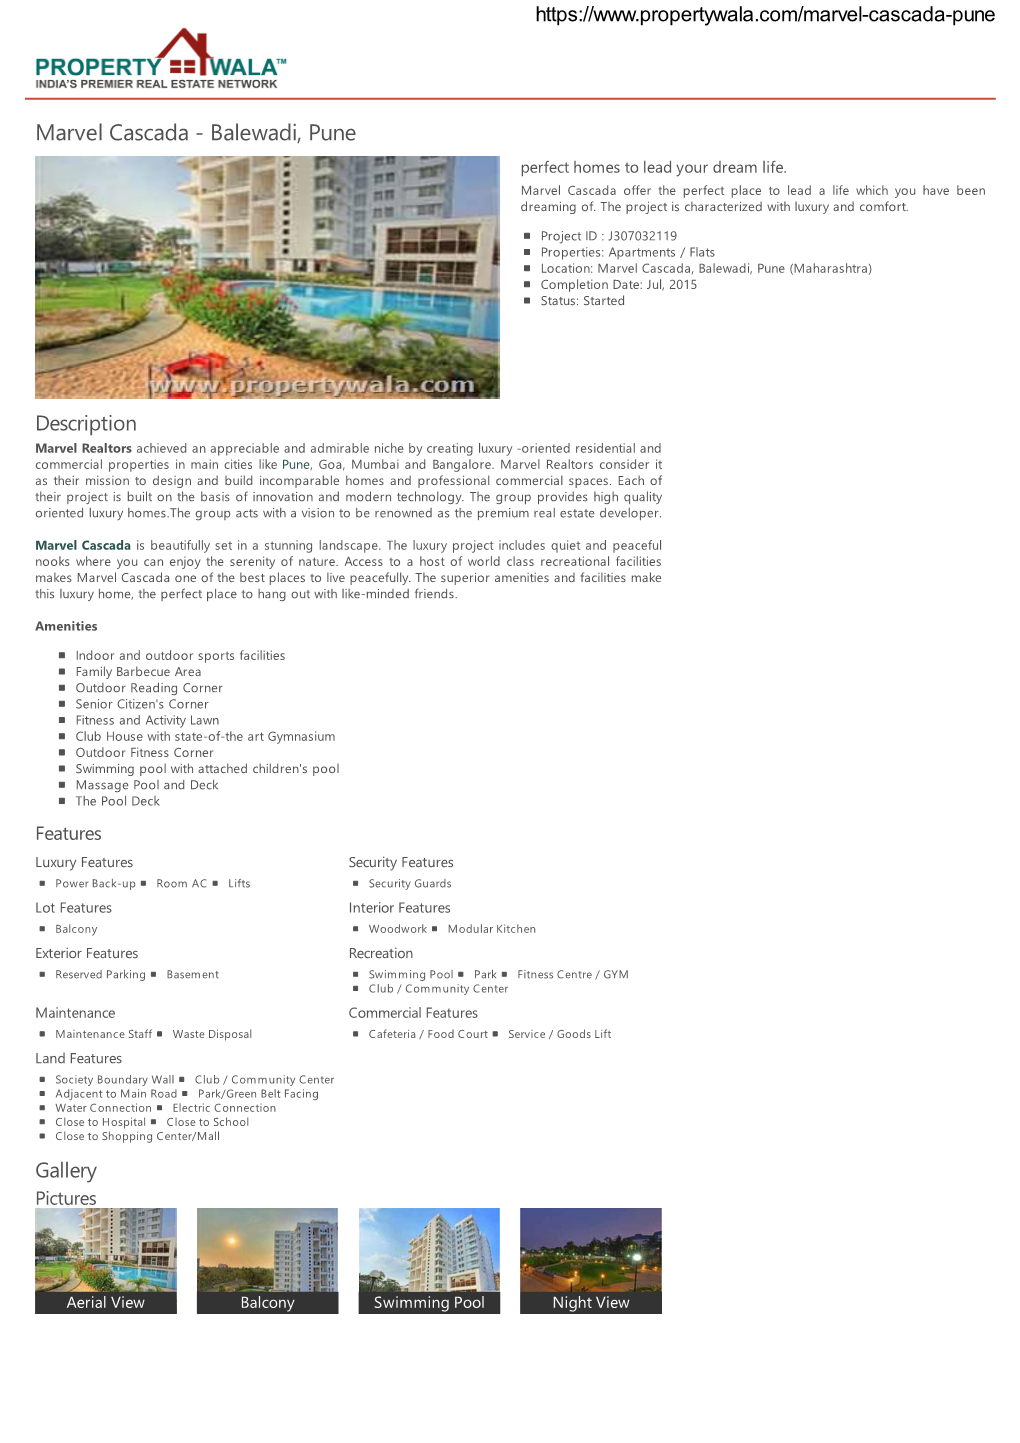 Marvel Cascada - Balewadi, Pune Perfect Homes to Lead Your Dream Life